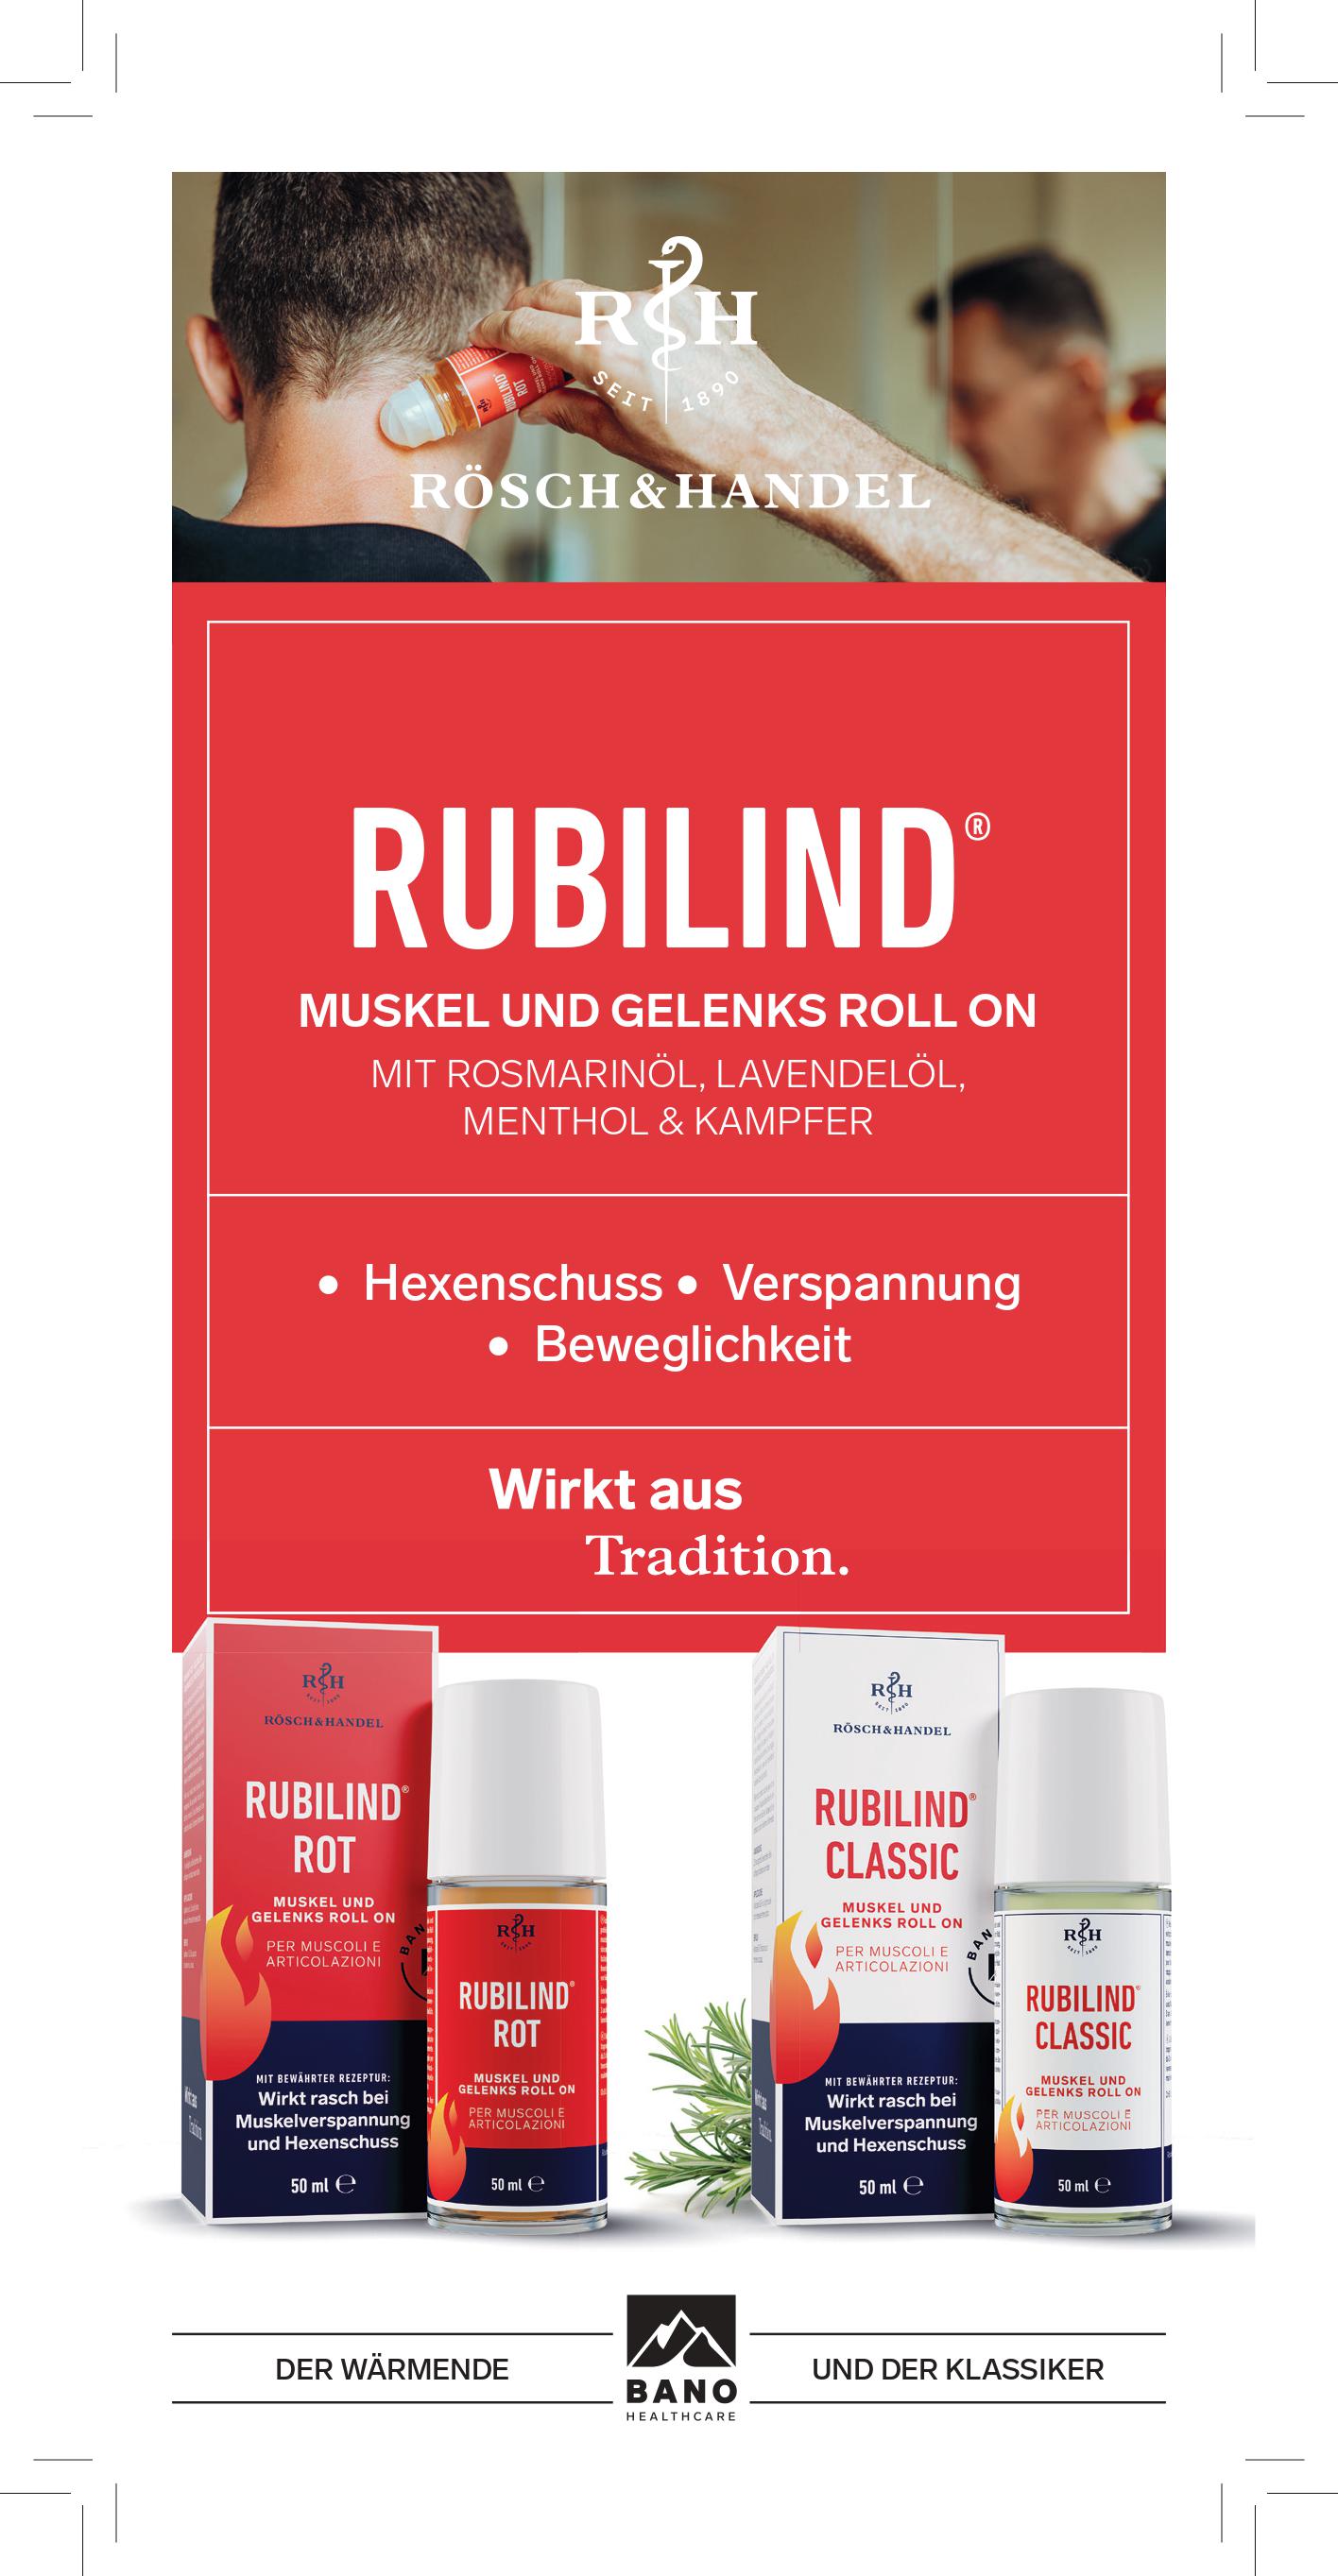 Rubilind Rot Muscle and Joint Roll-On